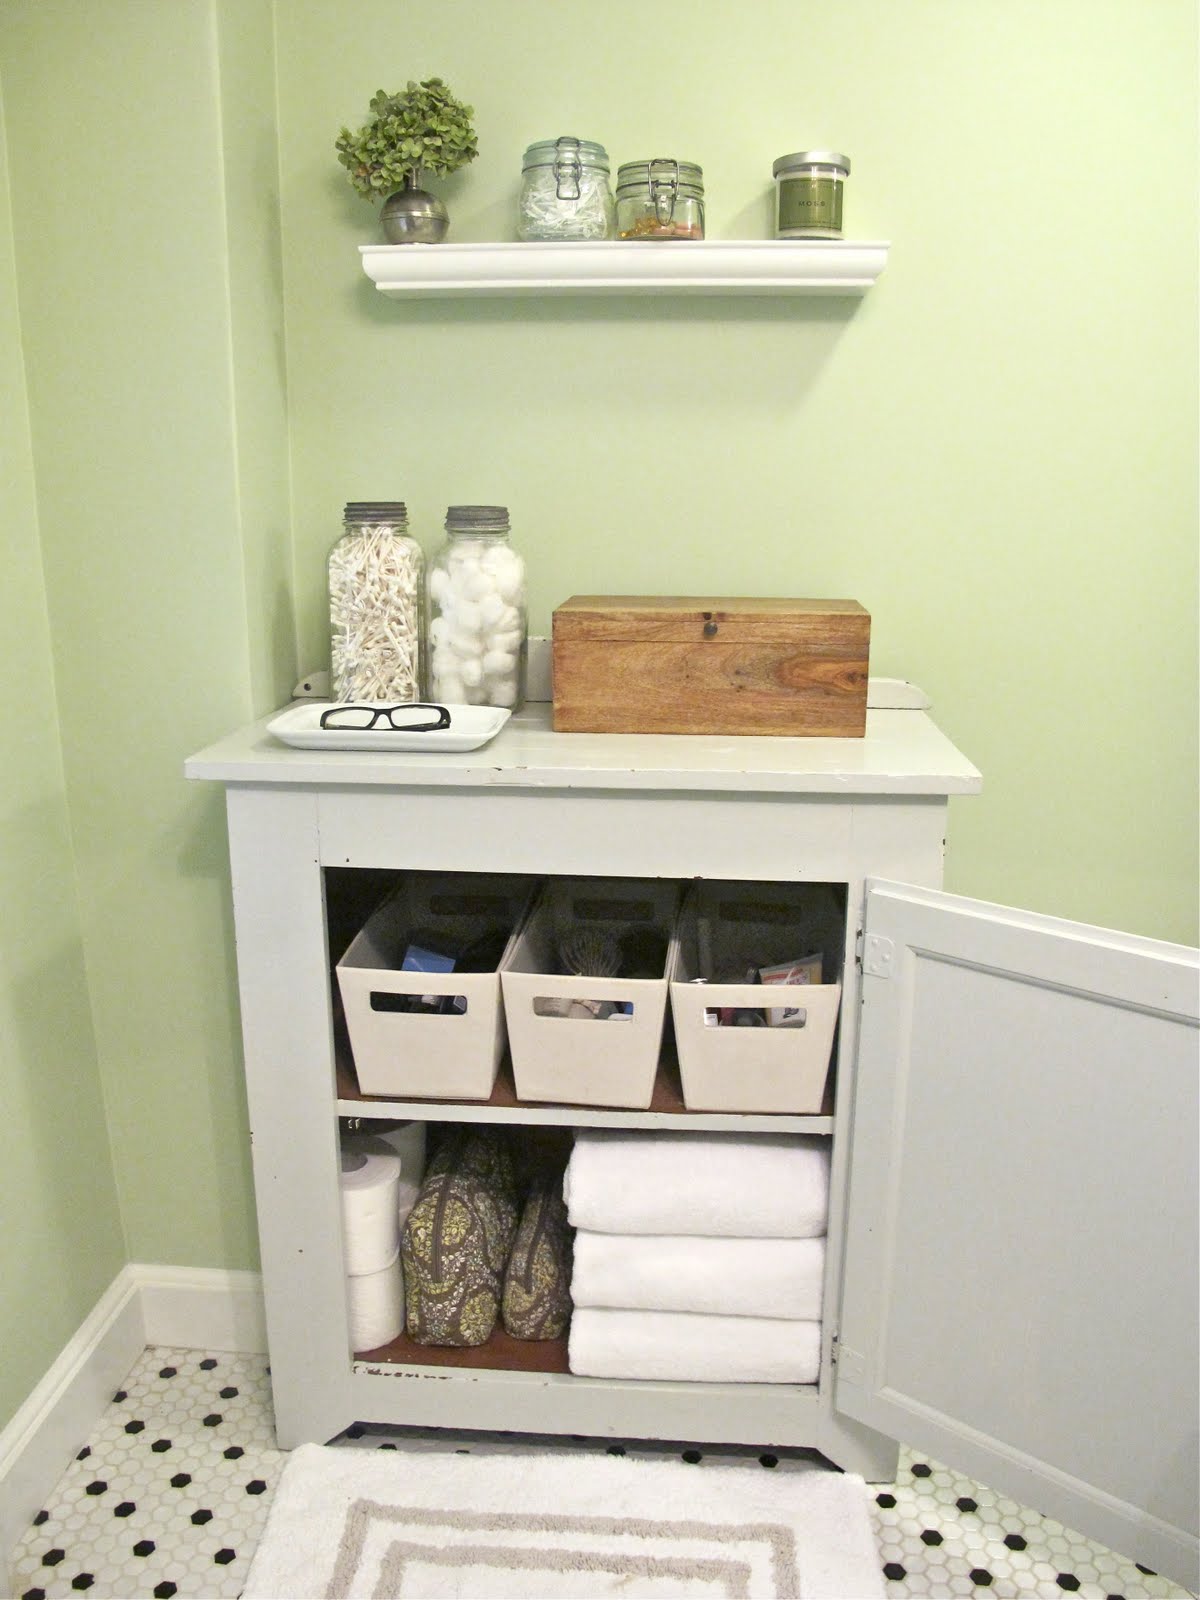 Lovely-Small-Wood-Storage-Cabinets-With-Doors-Design-Ideas.